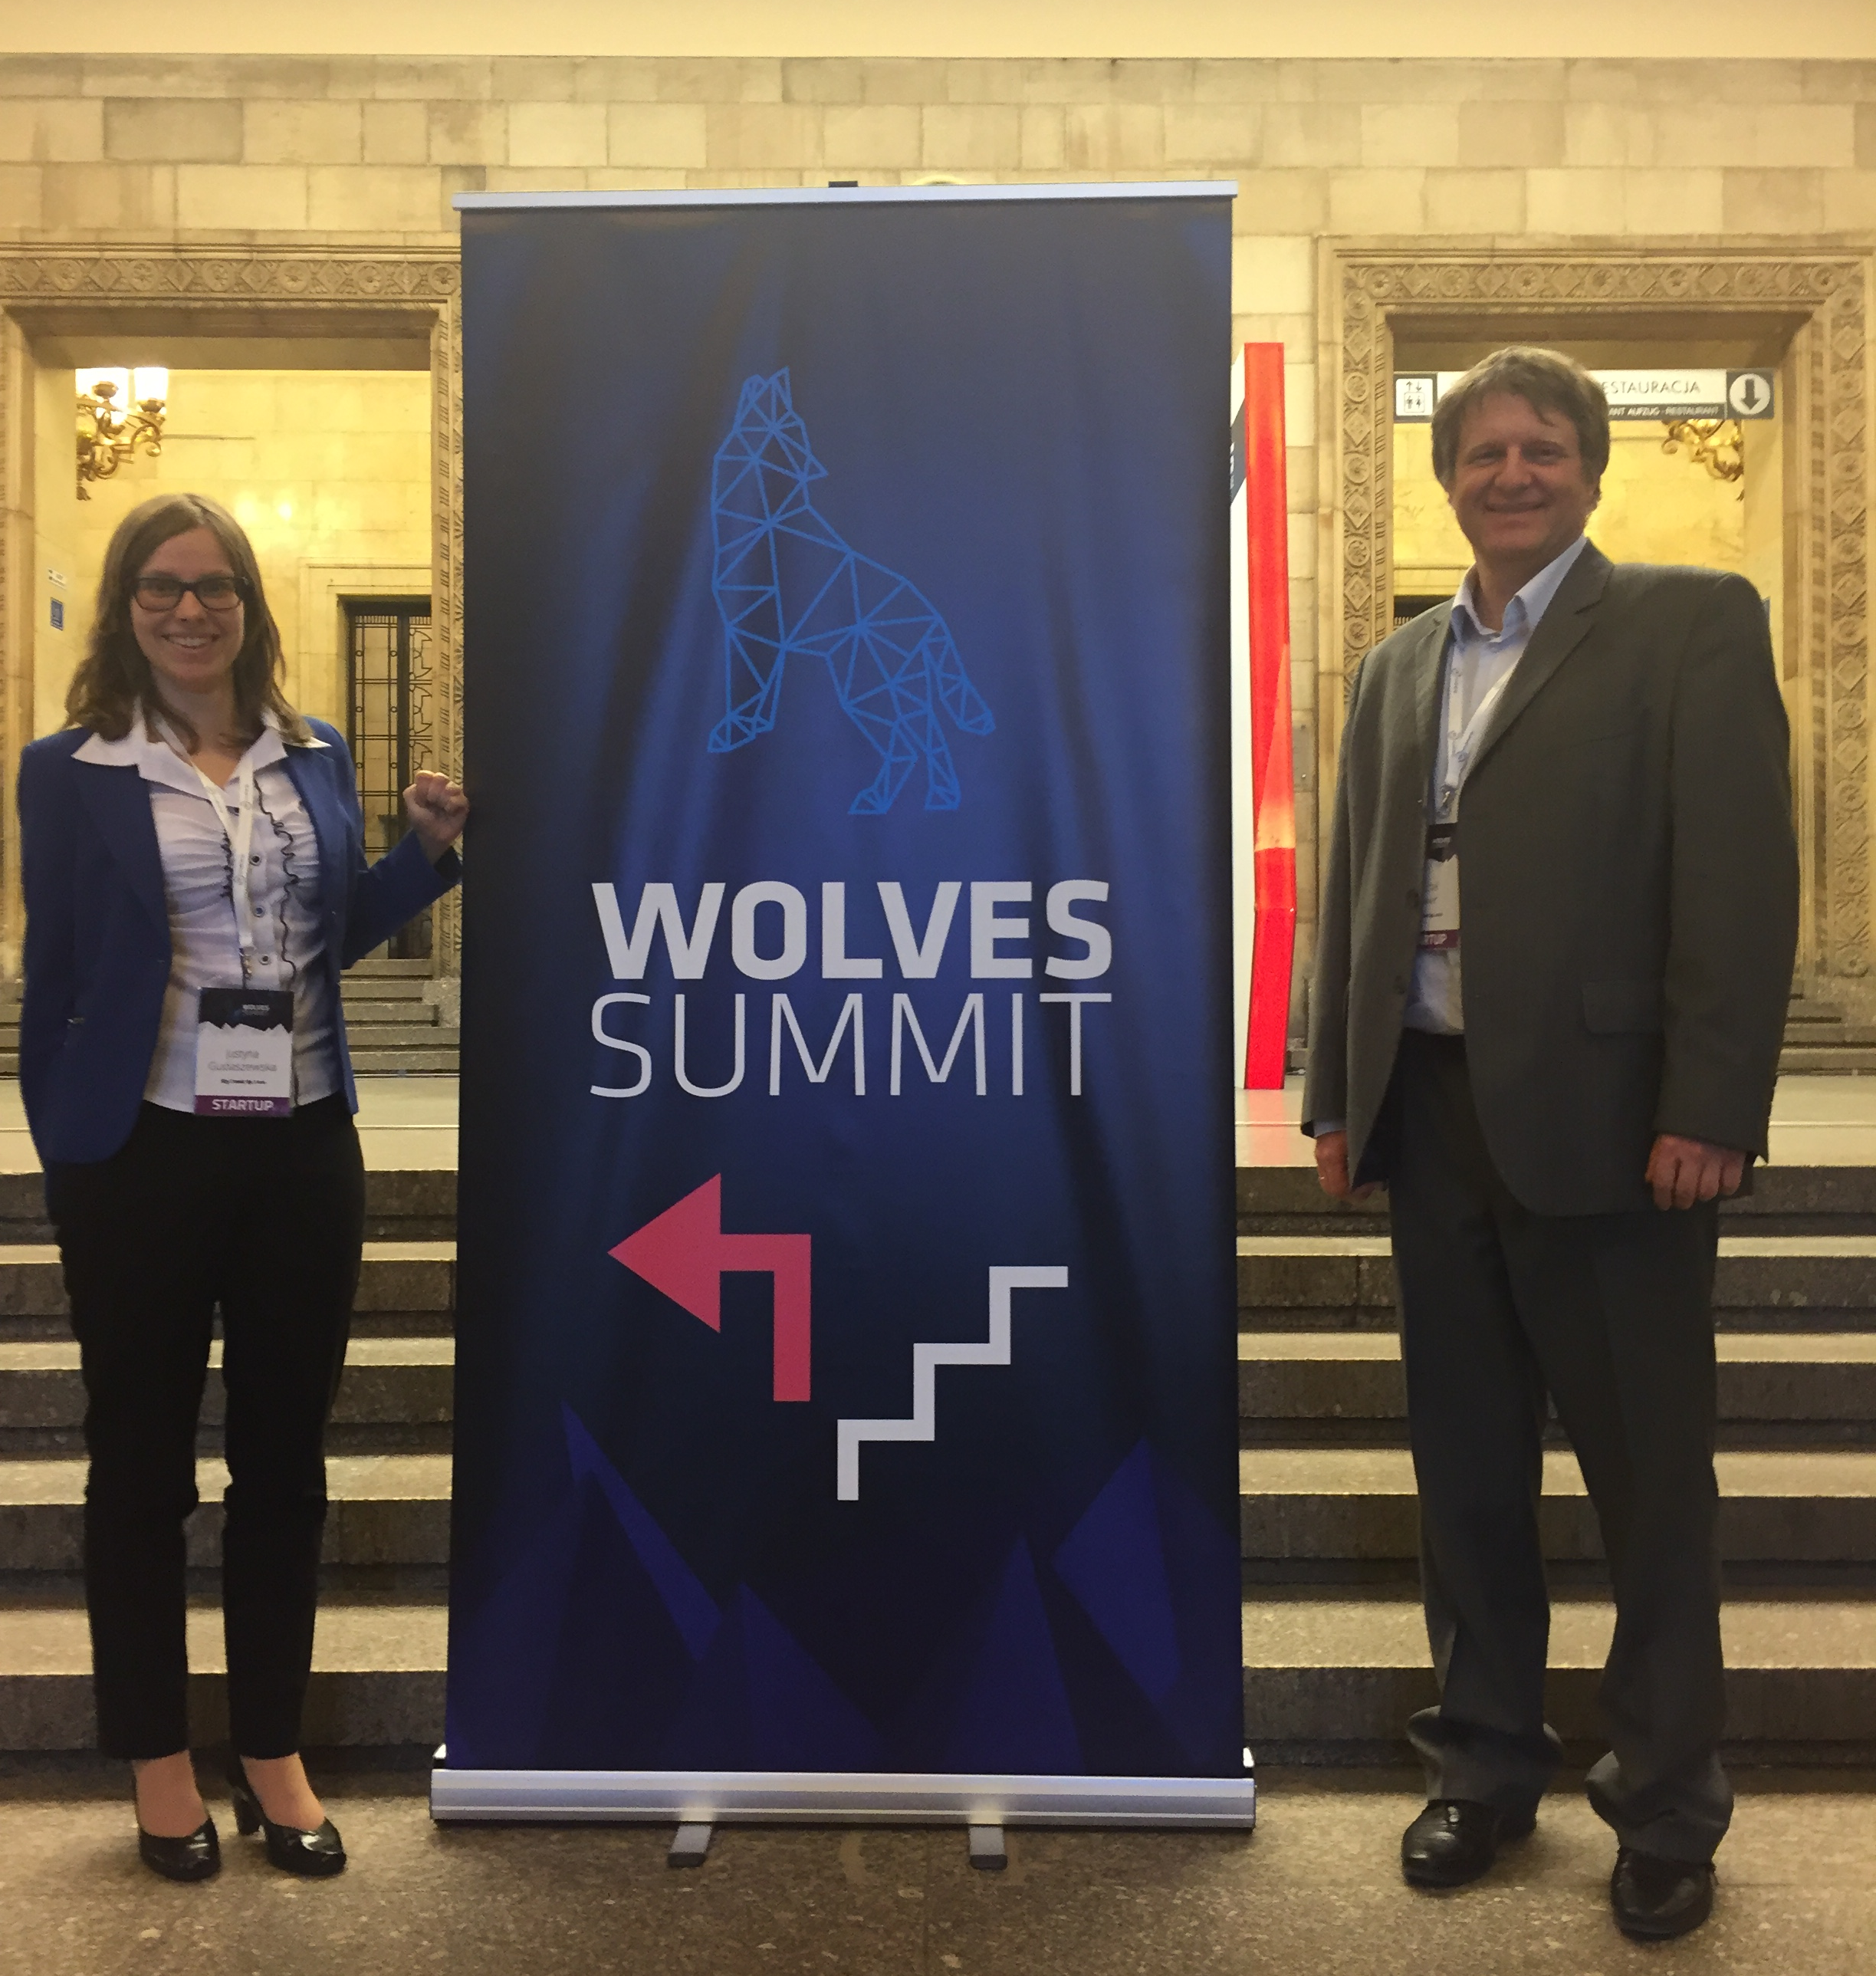 Sky Tronic attended Wolves Summit conference 2017